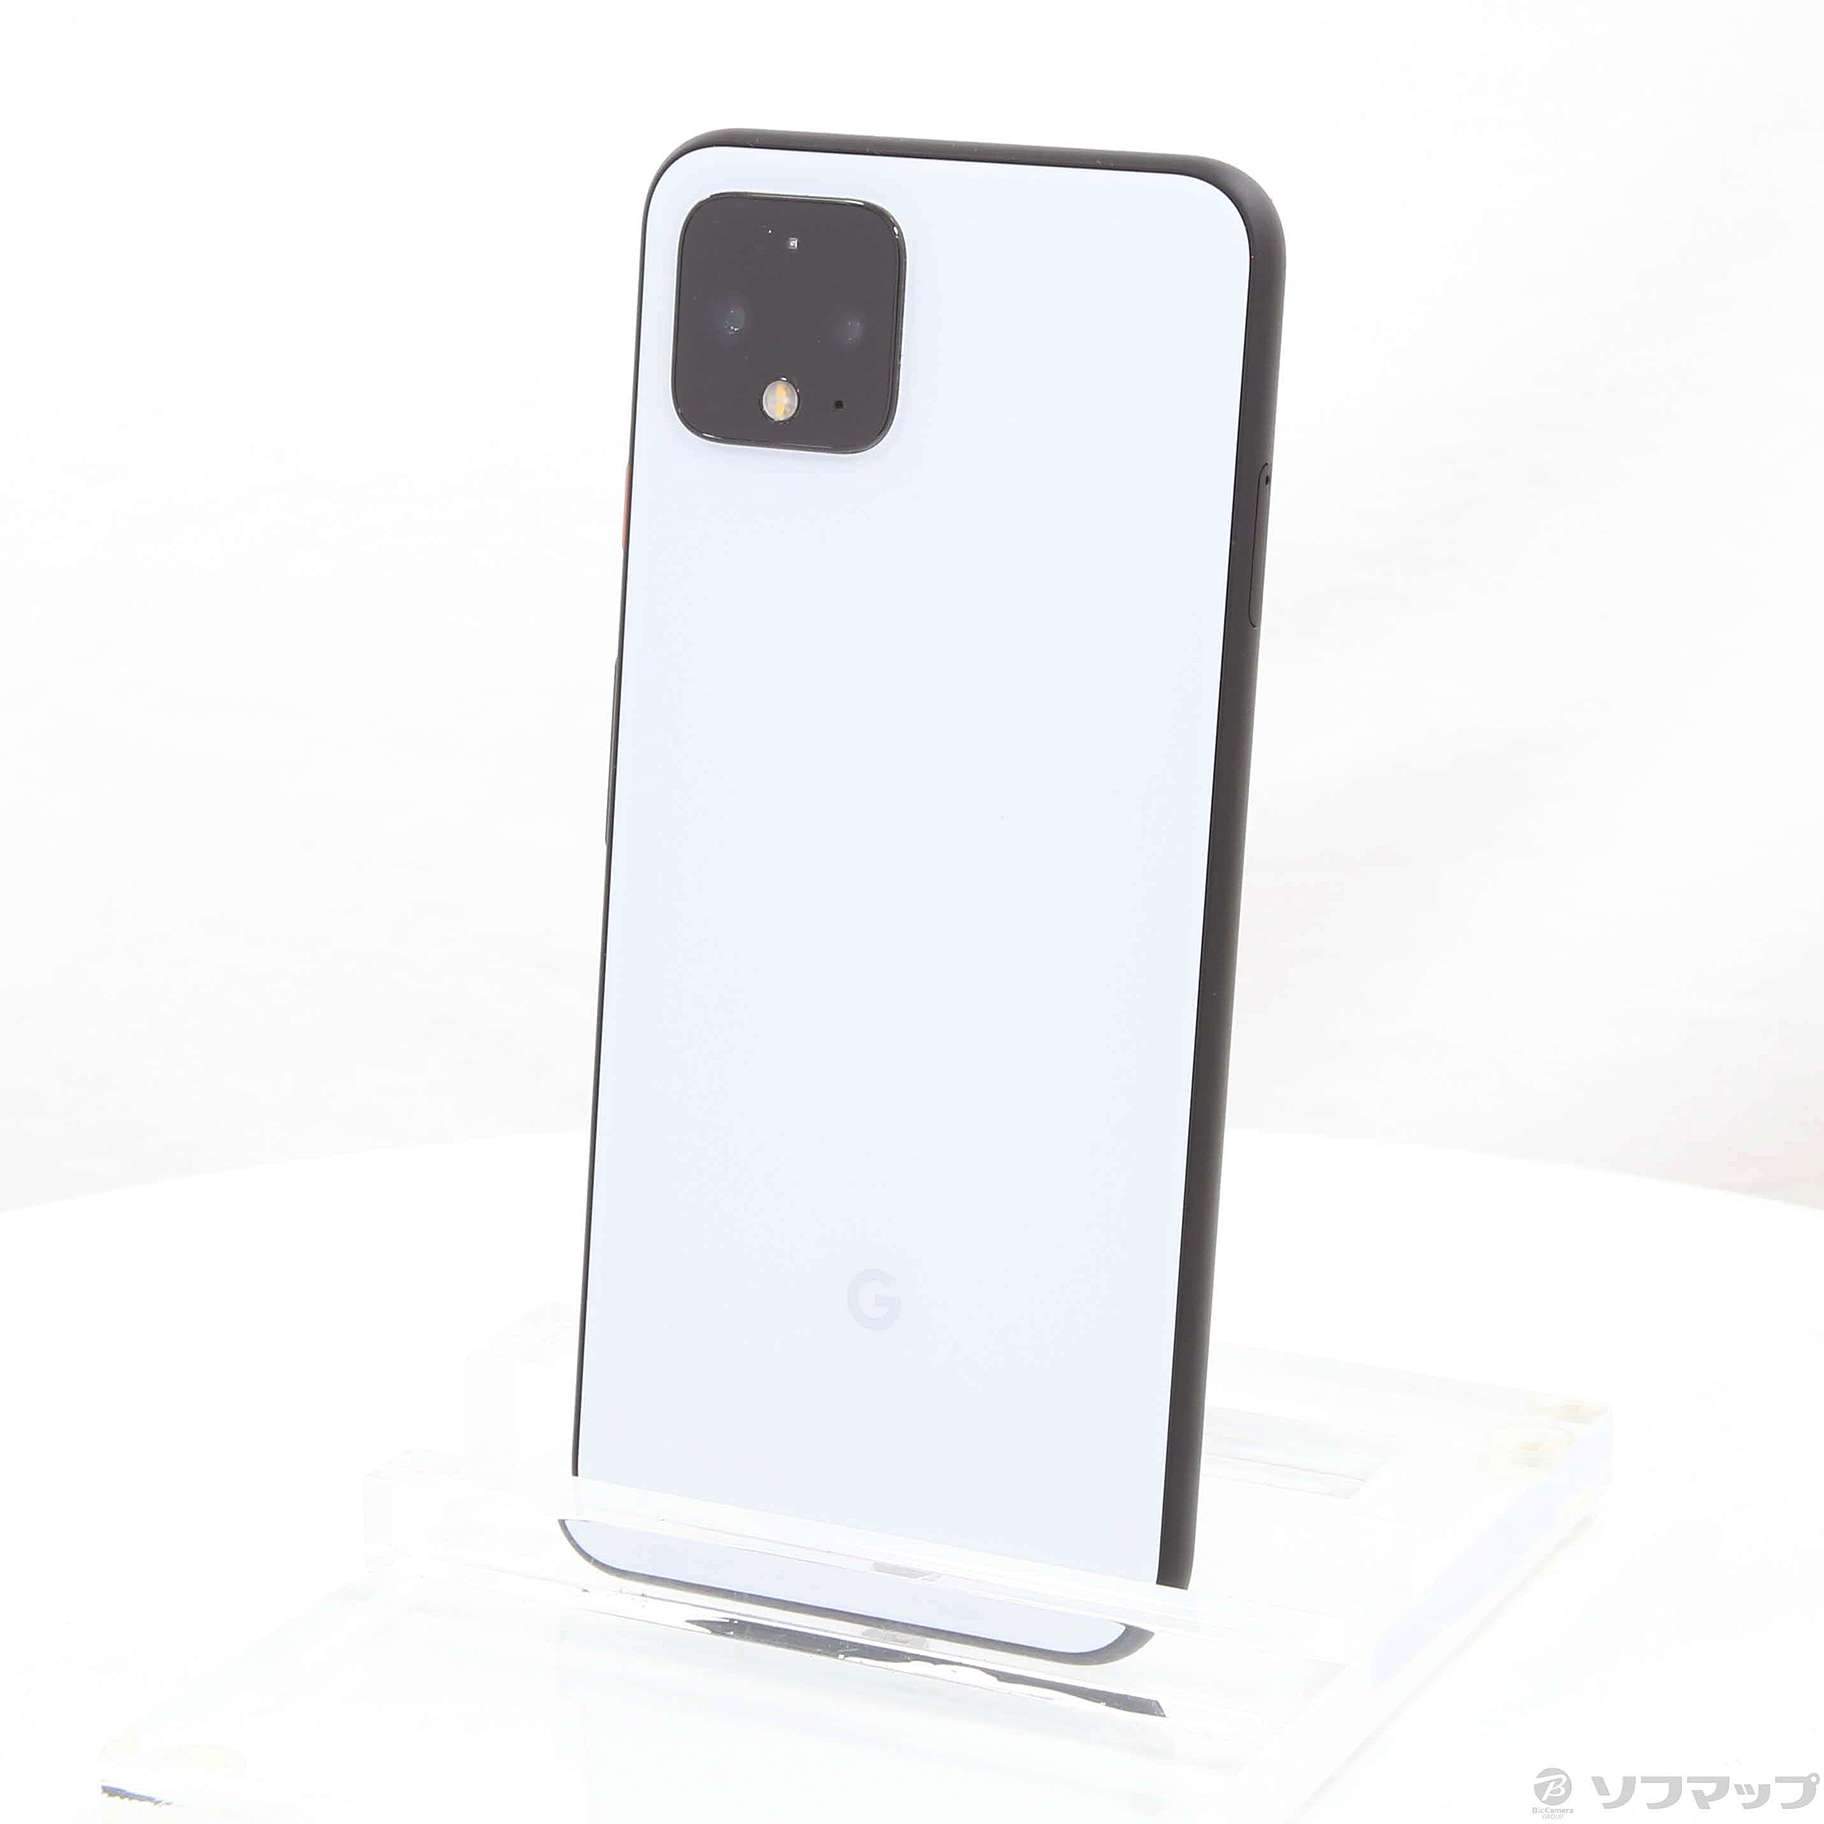 Google Pixel 4 128GB Clearly White